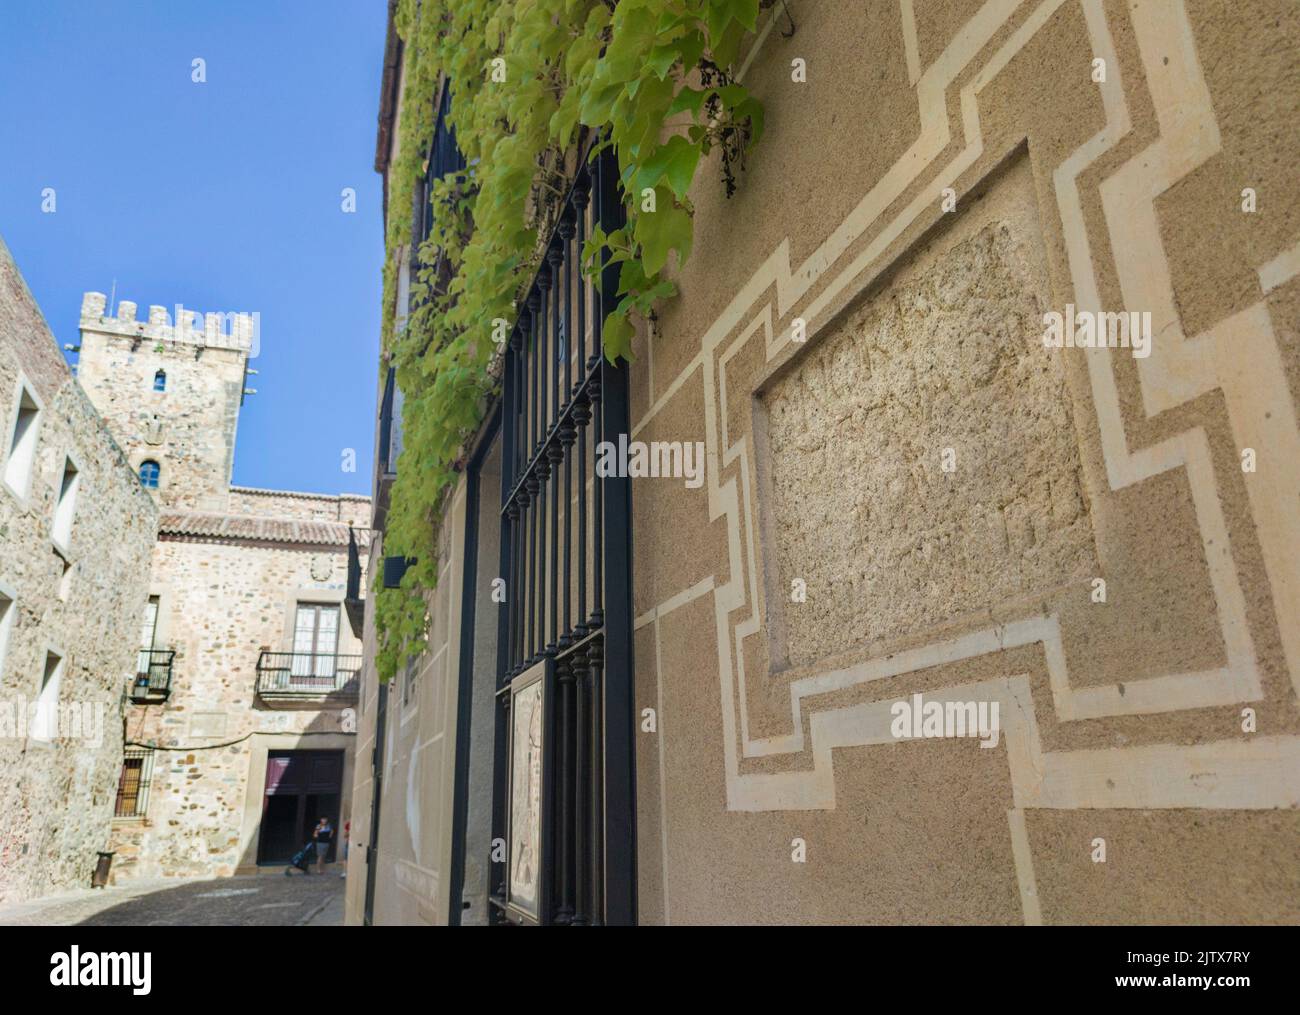 Roman tombstone built in historic quarter house. Roman remains still visible at Sande Palace, Caceres, Extremadura, Spain. Stock Photo